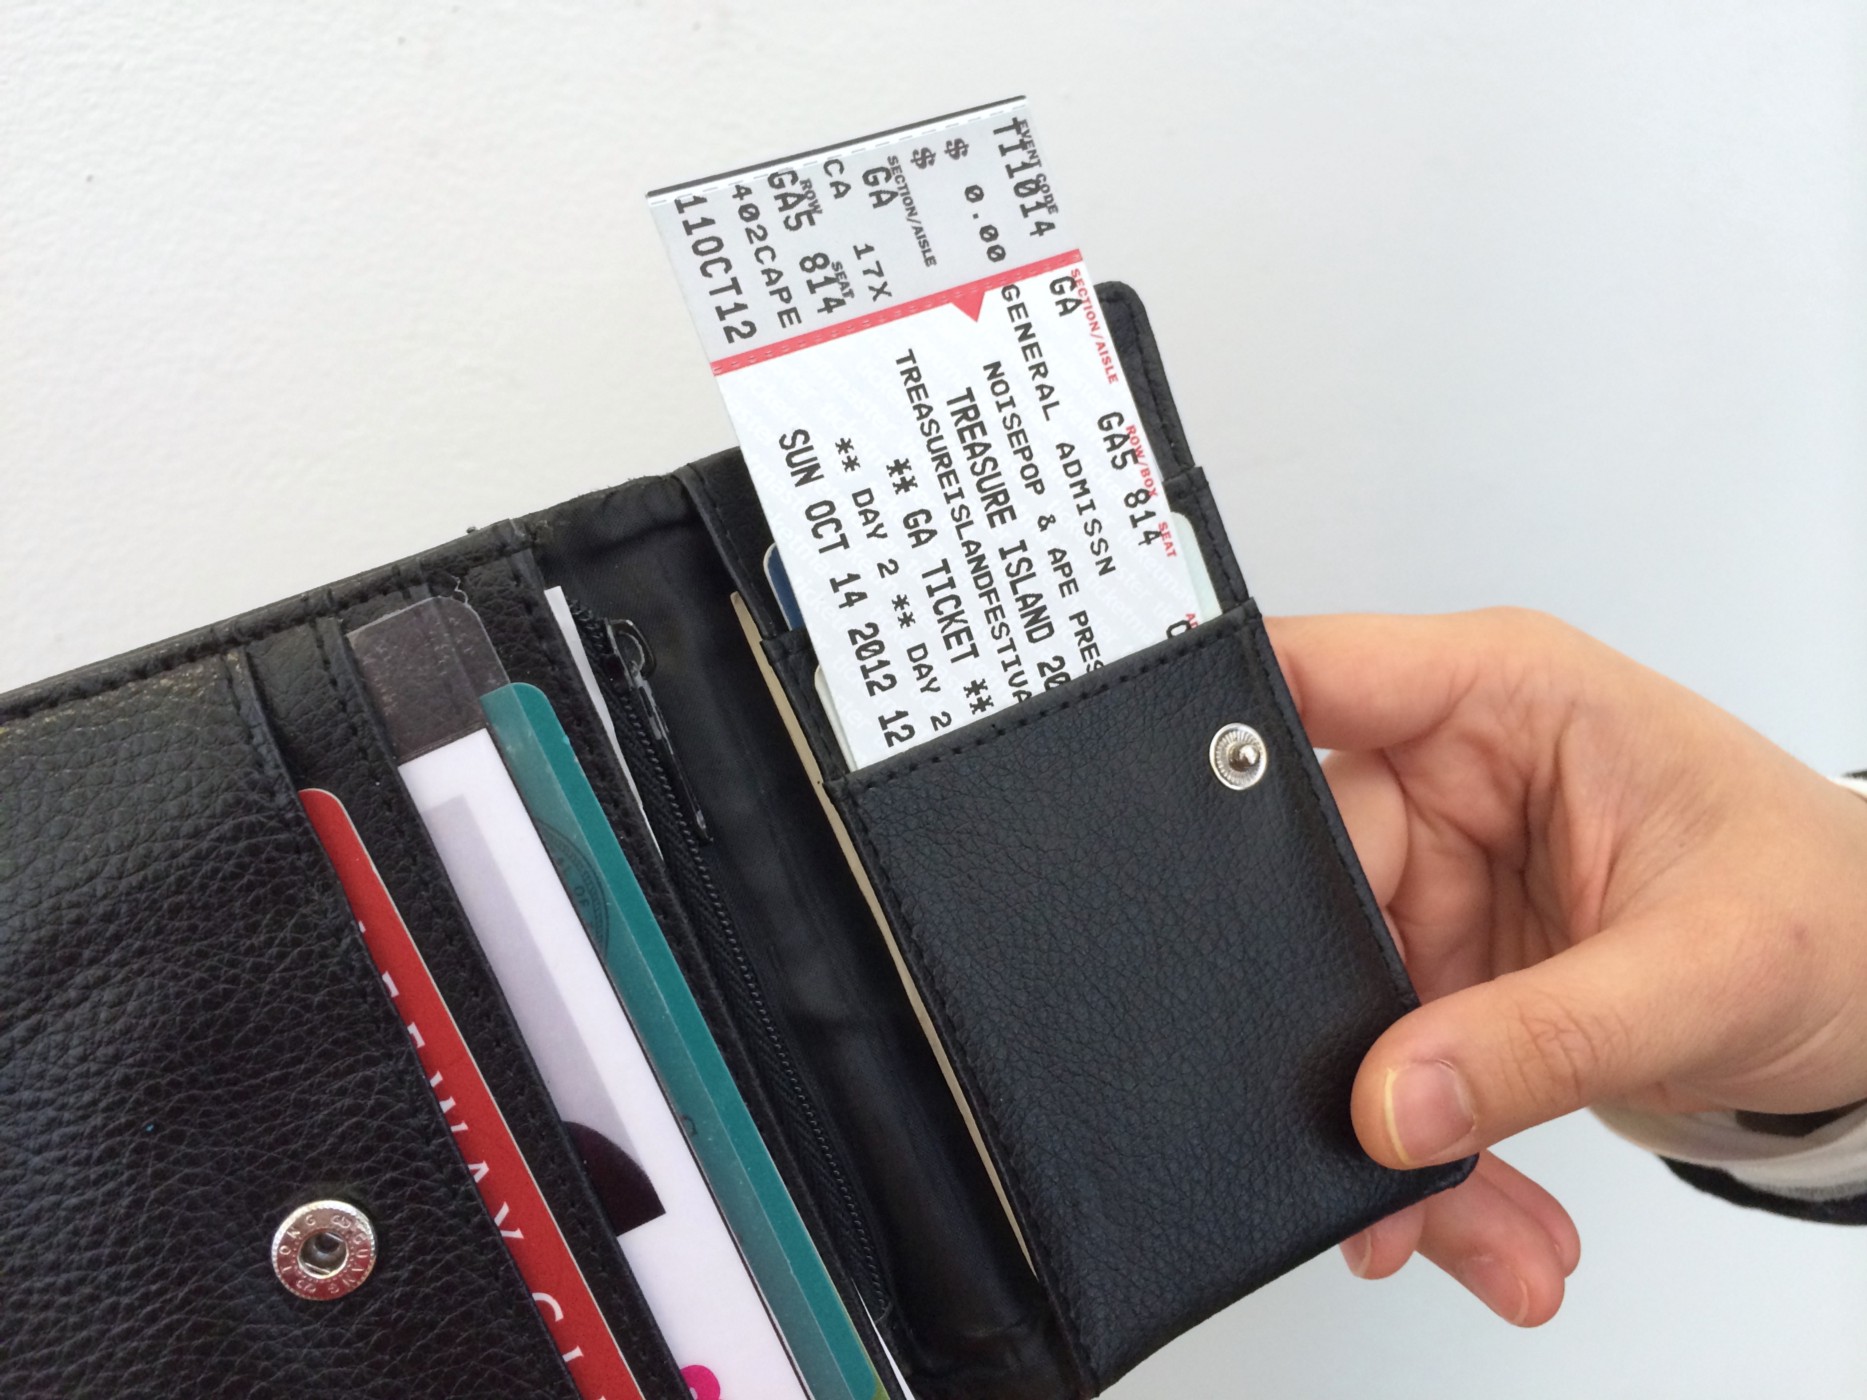 The ticket is two inches wide and can fit into a credit card slot. But it’s too long to fit in a wallet.